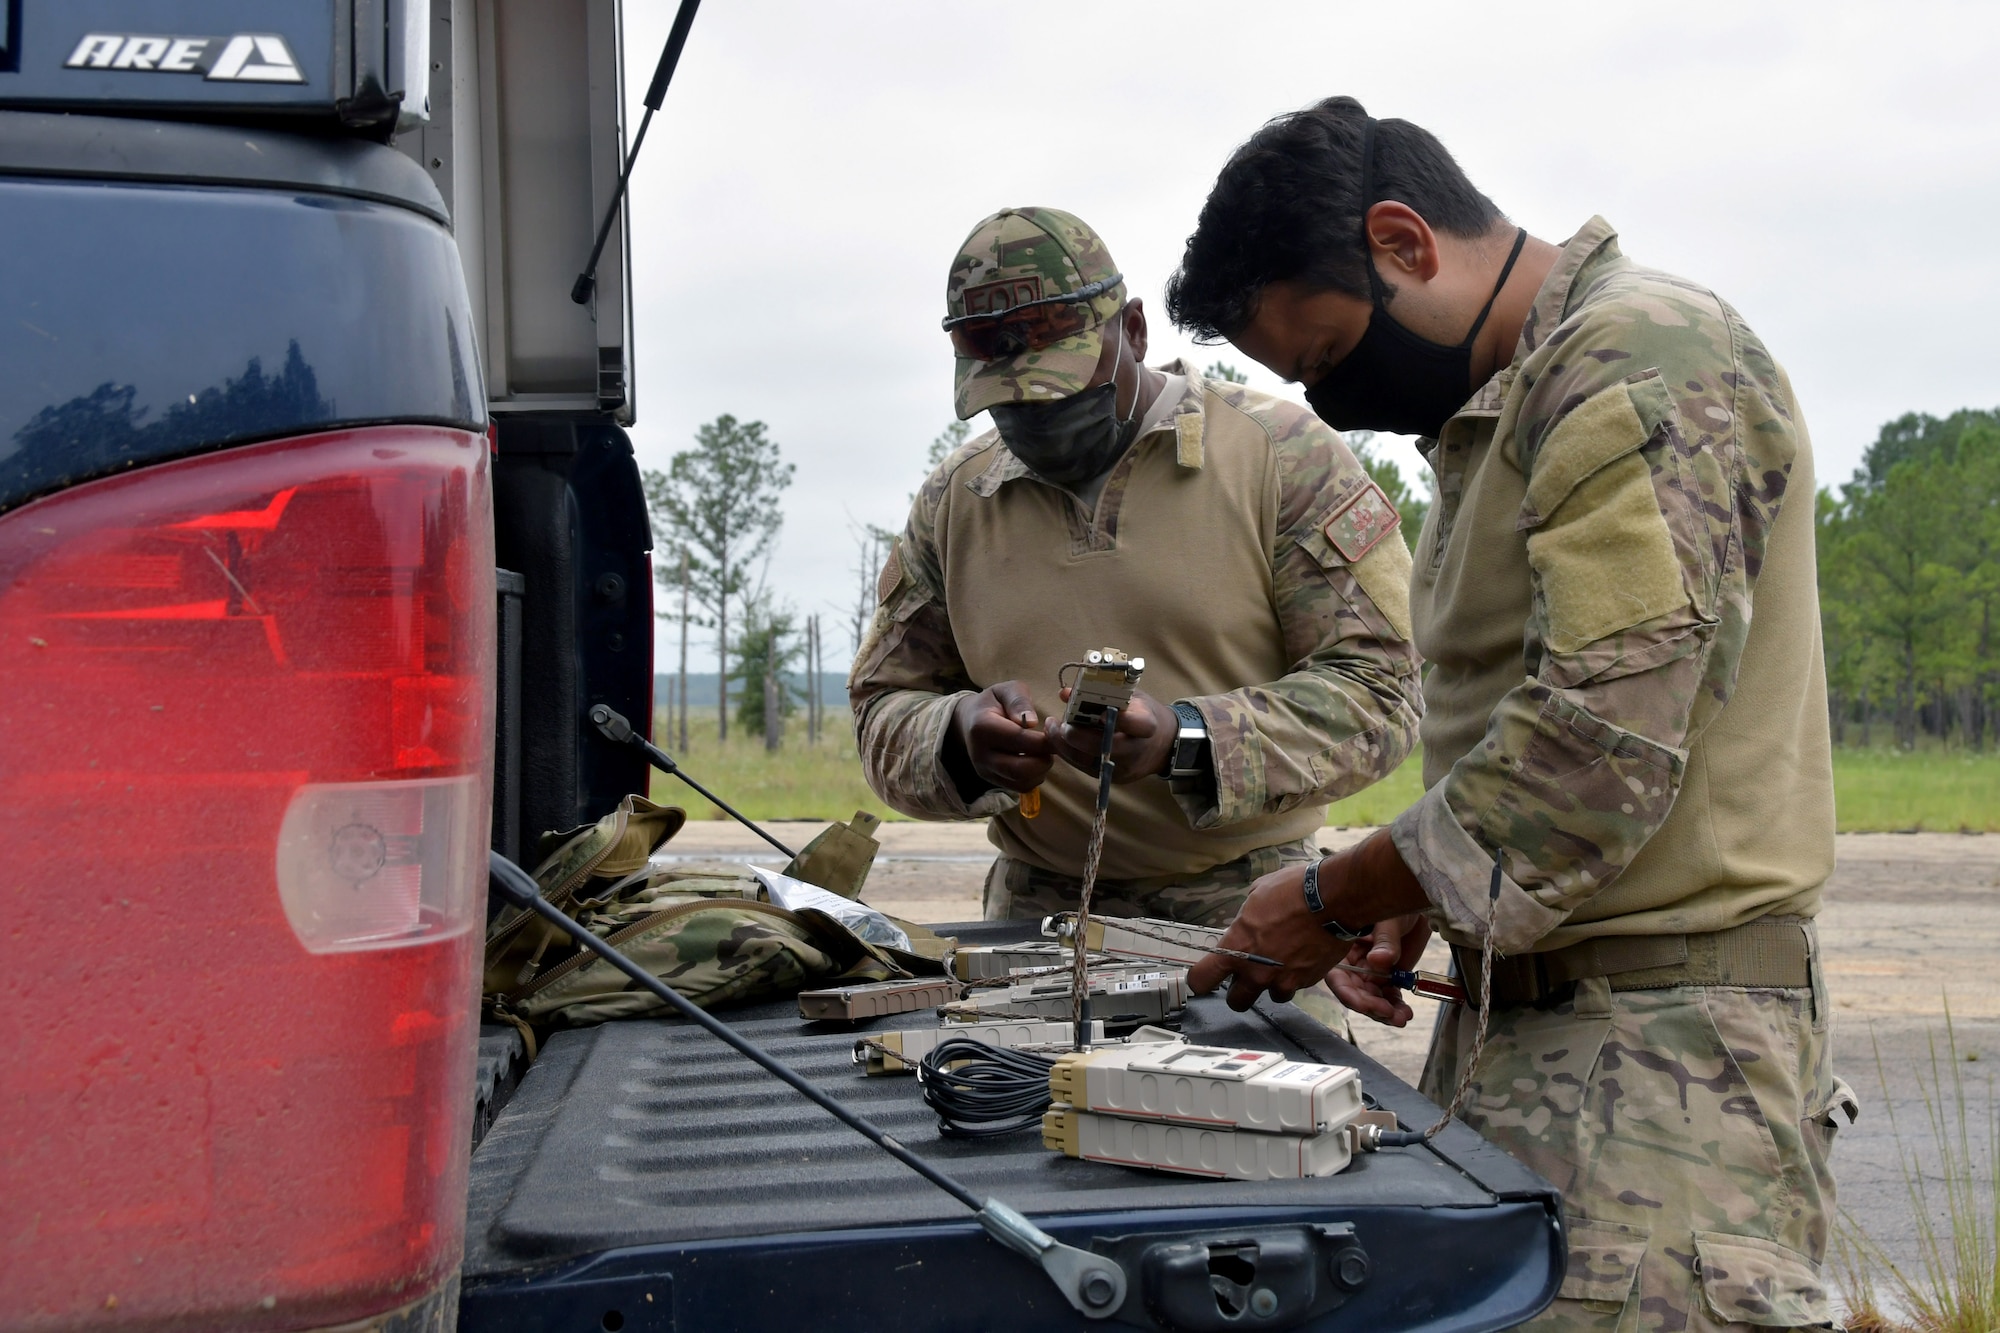 Chief Master Sgt. Antoine Thomas, 94th EOD Flight chief, and Staff Sgt. Juan Ortiz, 94th EOD Flight technician, prepare remote firing devices at Fort Stewart, Georgia, Sept. 16, 2020. Throughout the exercise, members went through numerous tasks such as working with electric demolition procedures, non-electric demolition procedures, demolition shape charges and cratering charges. (U.S. Air Force photo by Airman 1st Class Kendra A. Ransum)